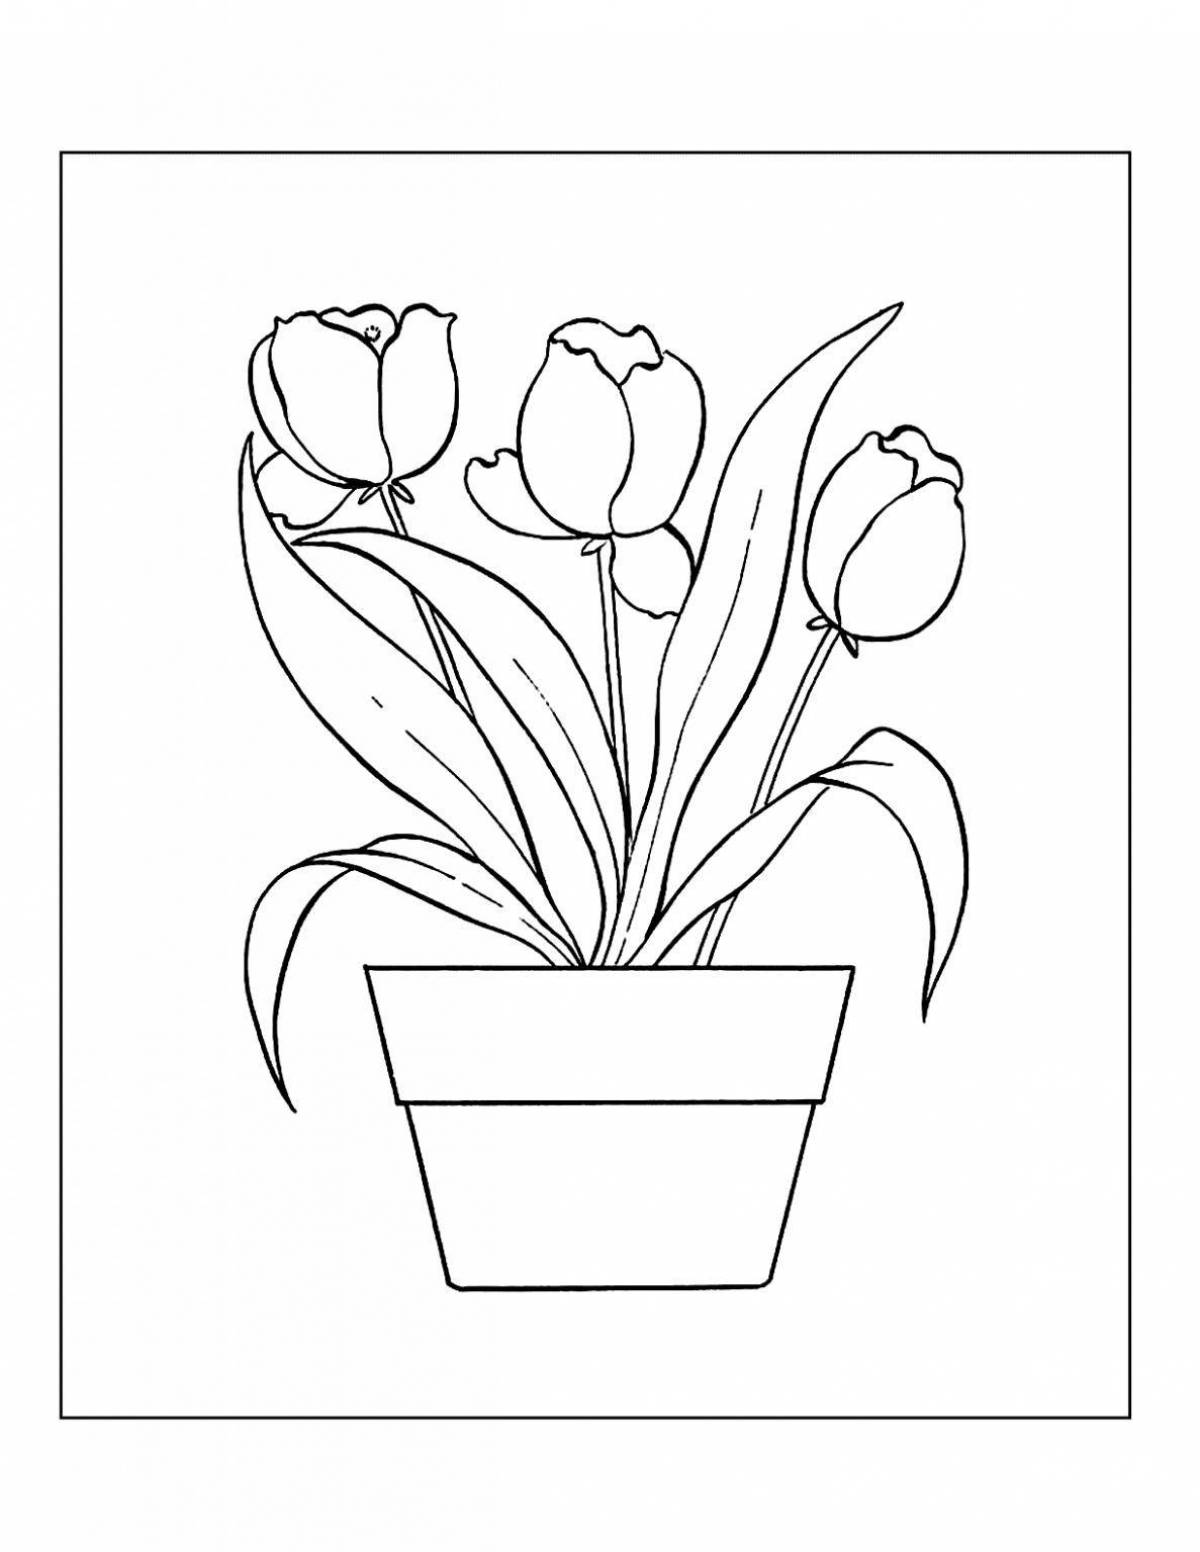 Coloring page glorious tulips March 8